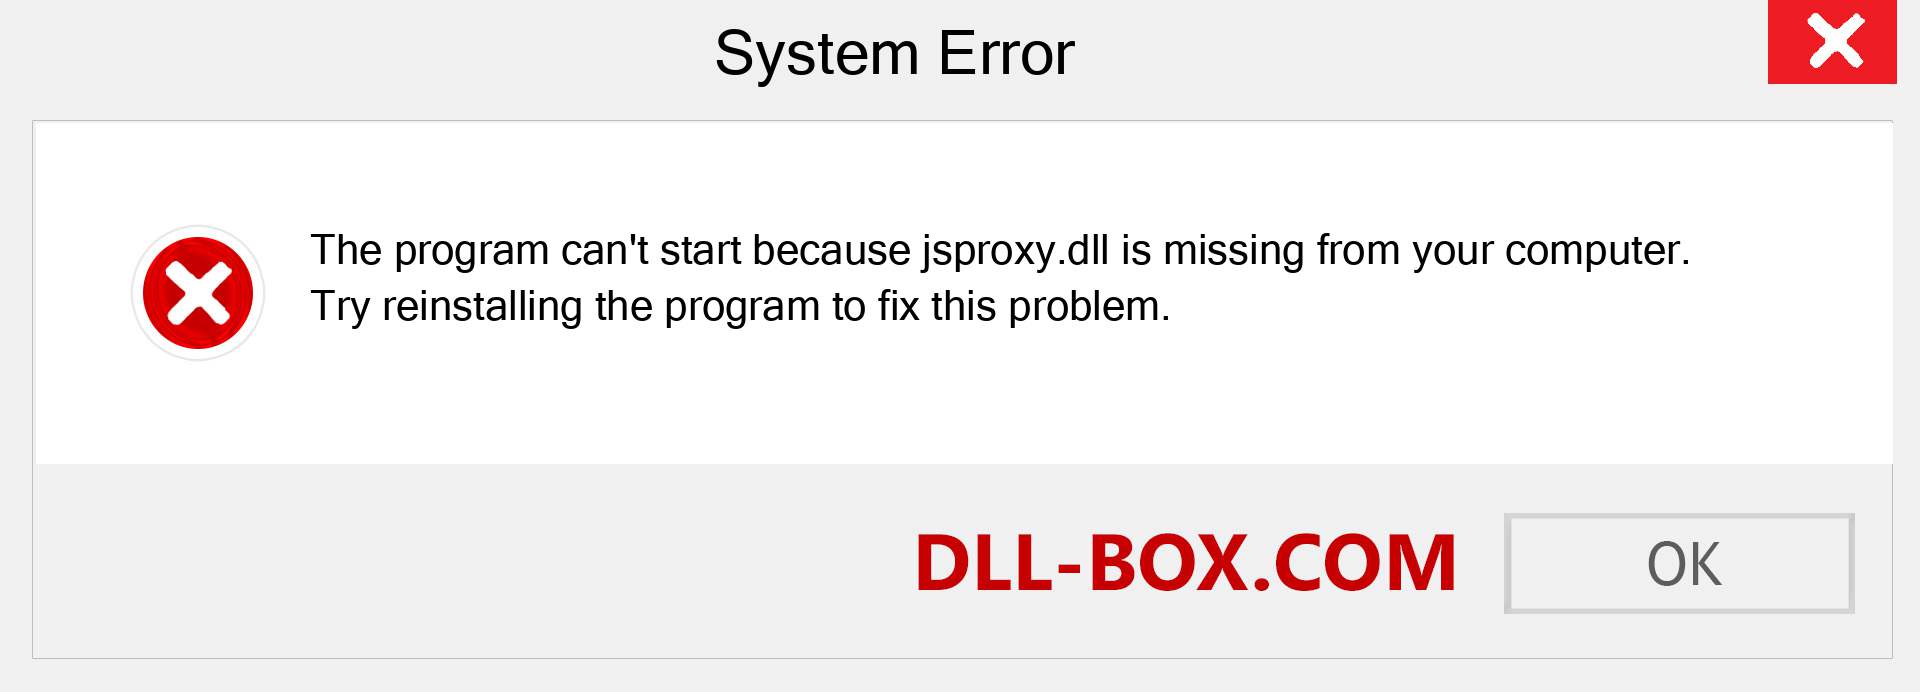  jsproxy.dll file is missing?. Download for Windows 7, 8, 10 - Fix  jsproxy dll Missing Error on Windows, photos, images